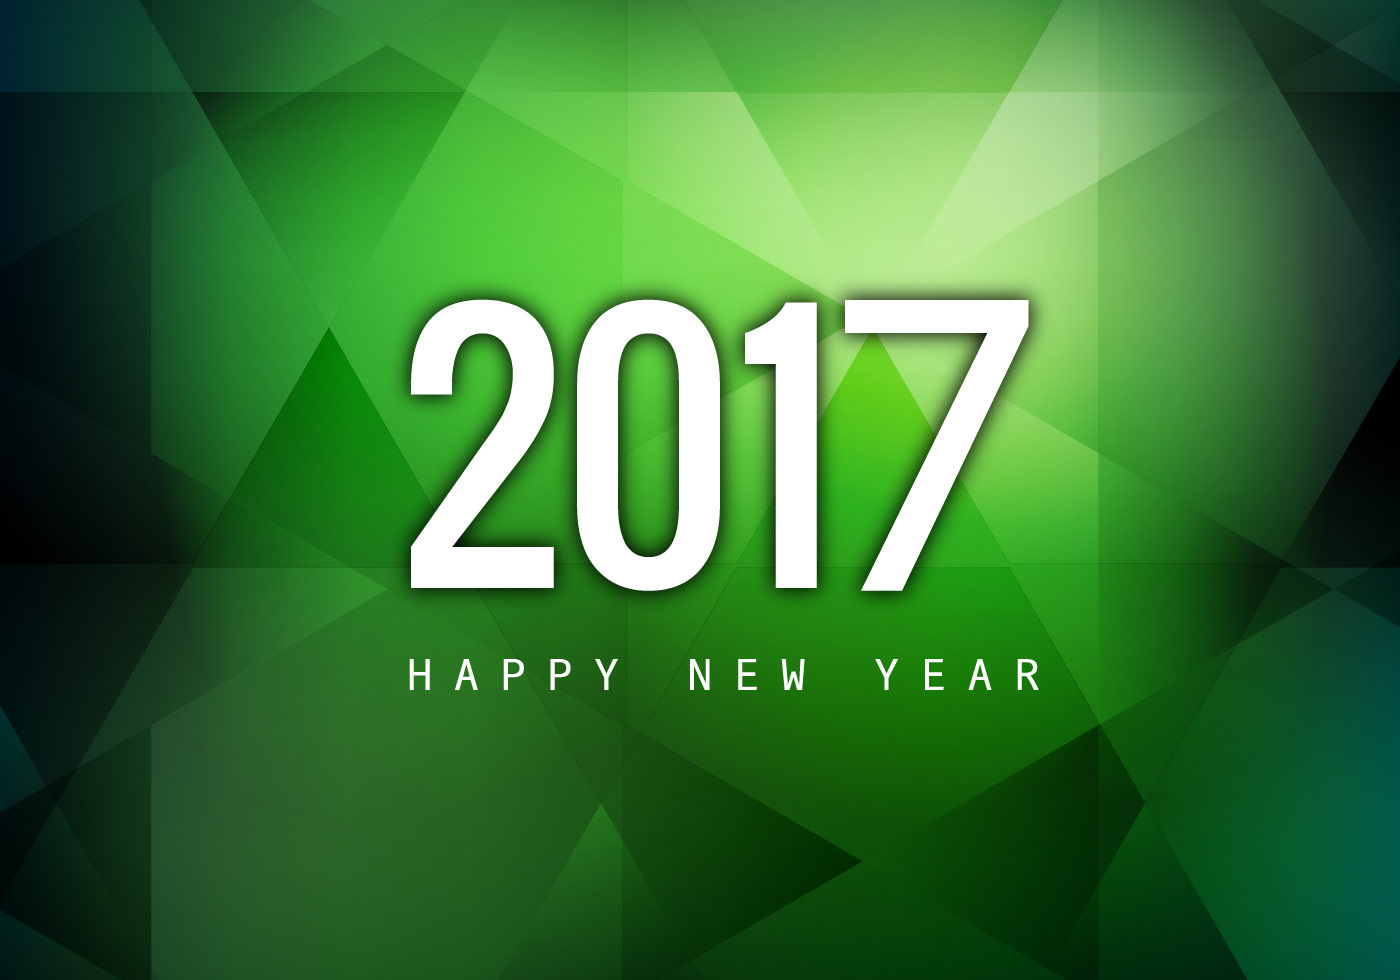 happy new year 2017 wallpaper,green,text,font,logo,graphic design